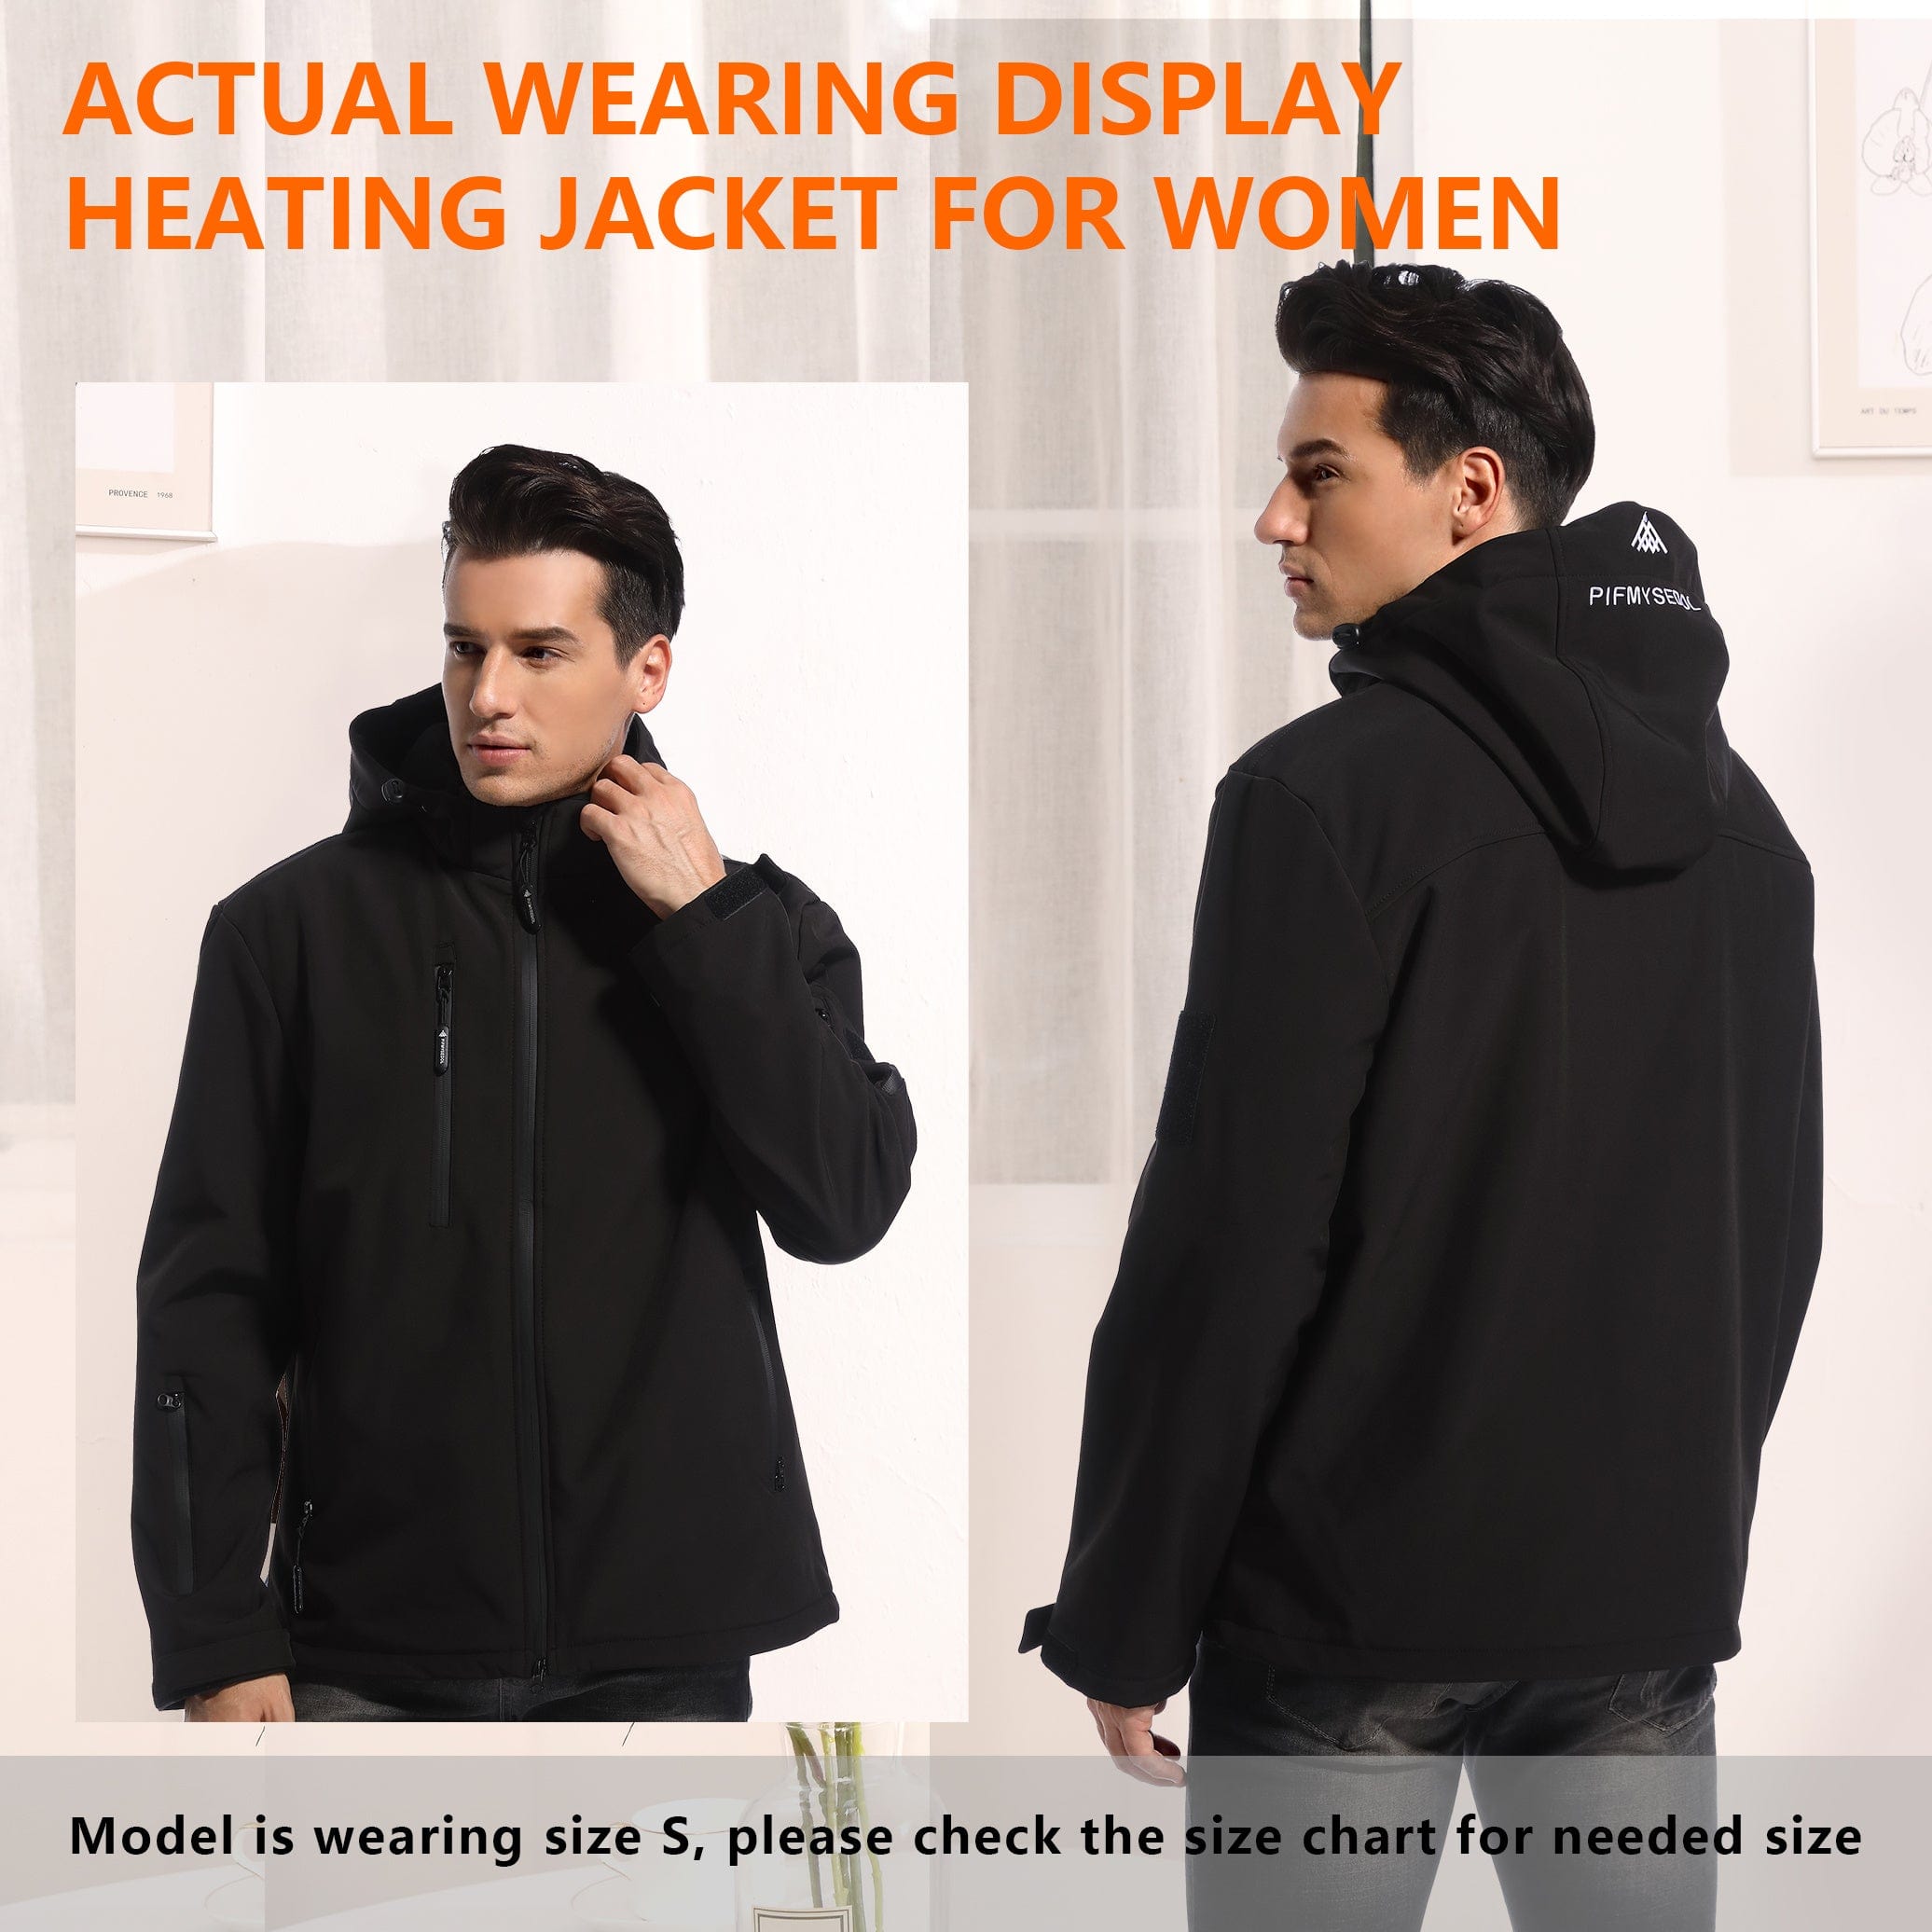 Men's Heated Jacket With Battery Pack, Outdoor Sports Heated Jackets For Men In Black - Size. M